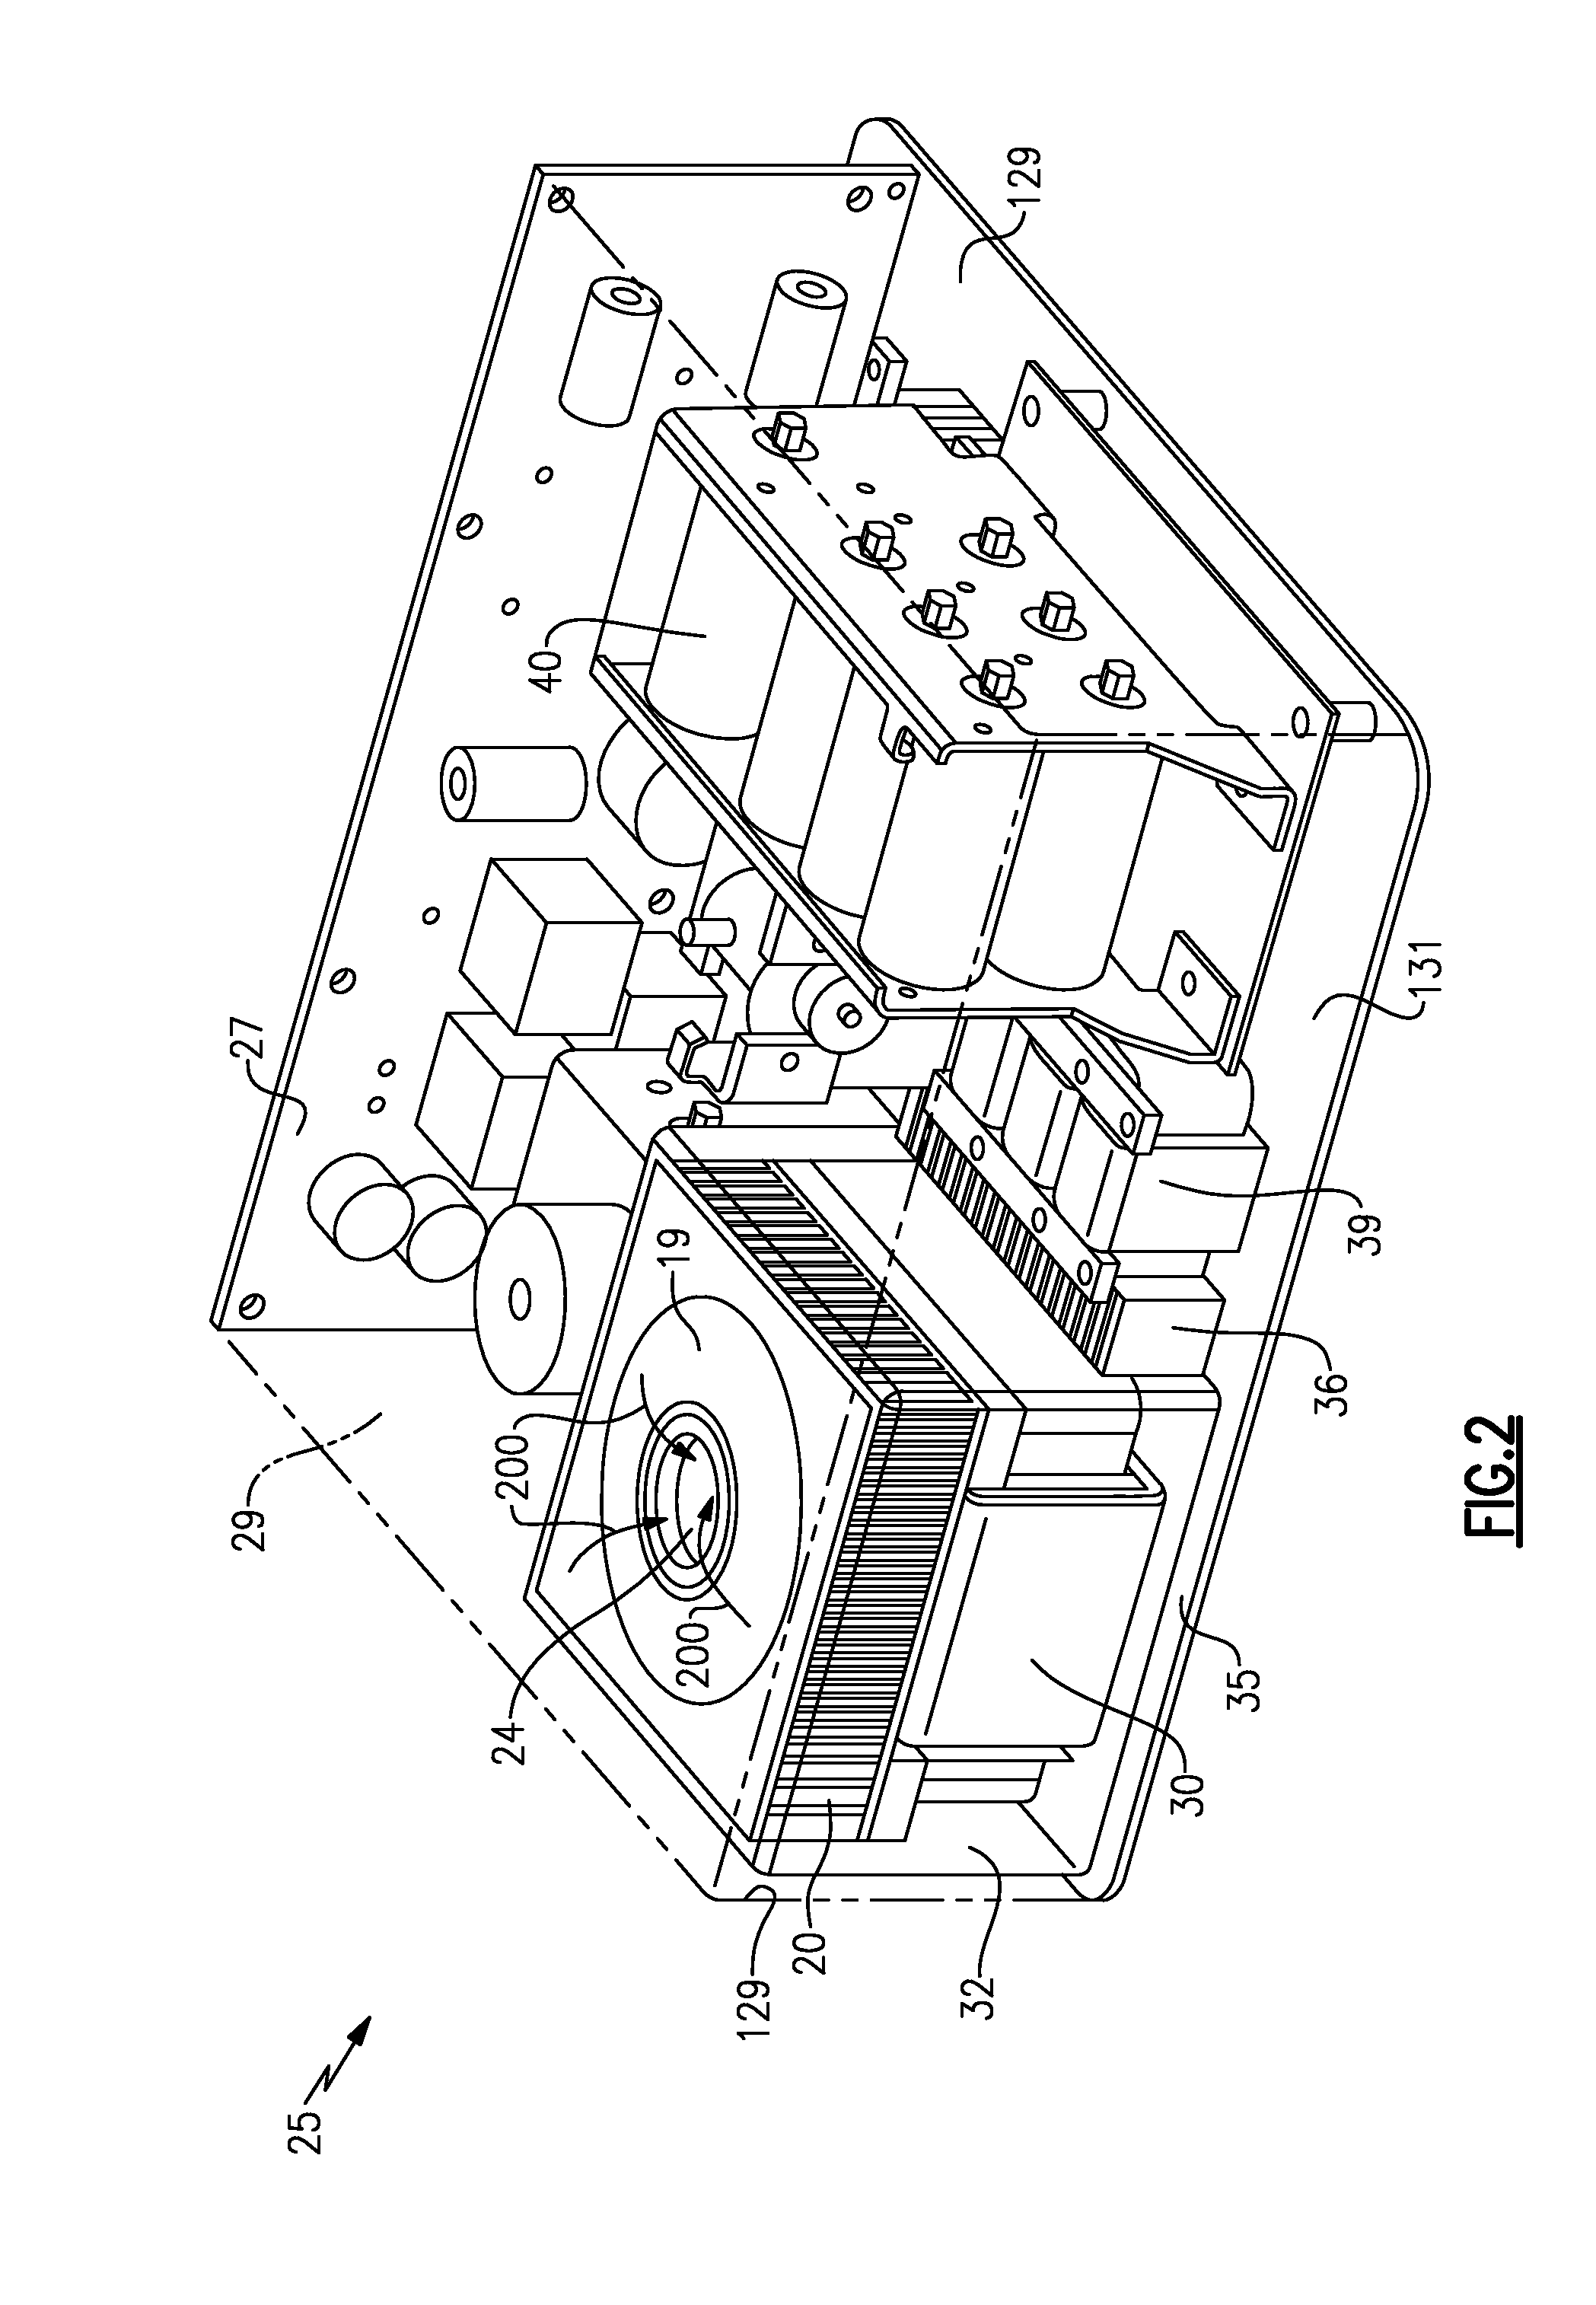 Integrated Blower Diffuser and Heat Exchanger for Electronics Enclosure